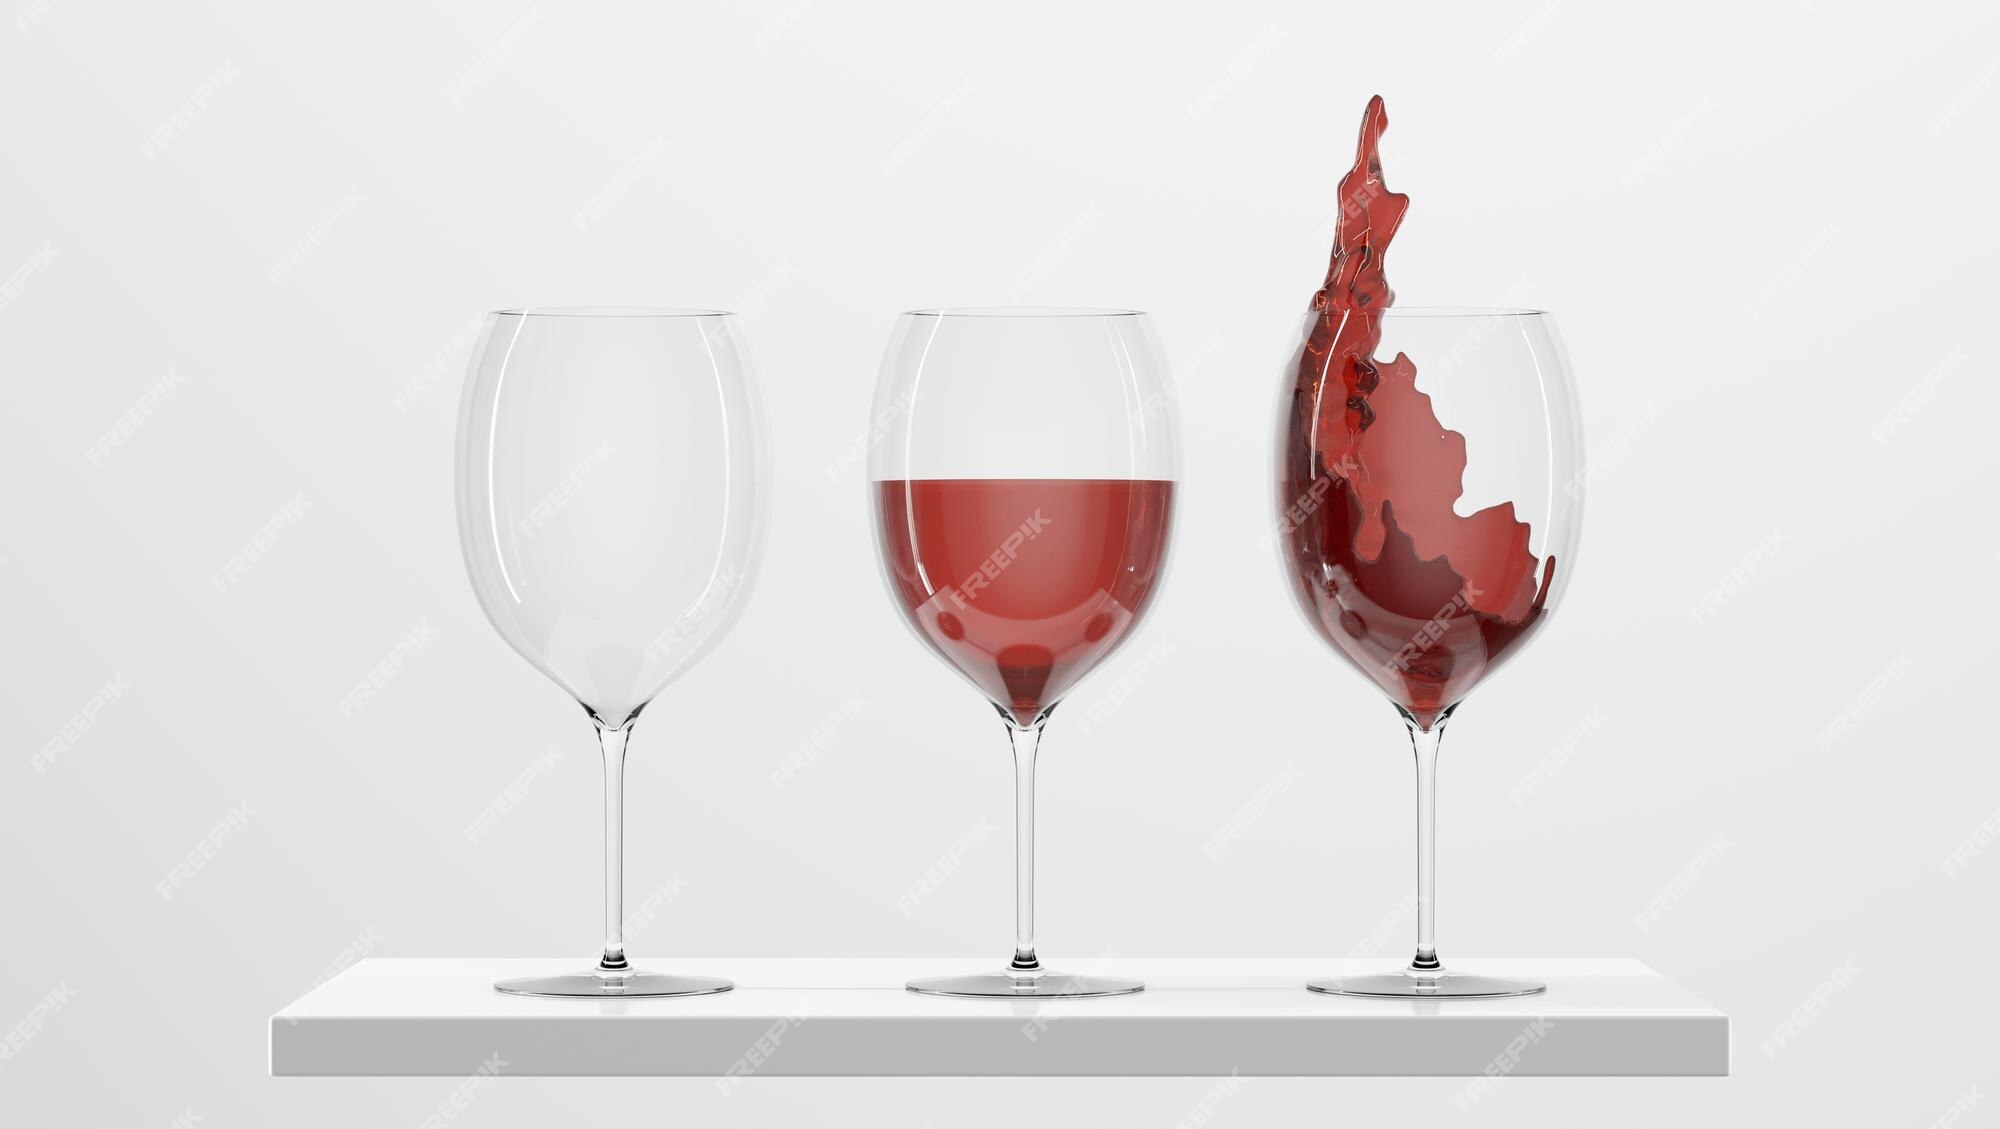 https://img.freepik.com/premium-photo/wineglasses-set-with-red-liquid-podium-empty-full-with-splashes-droplets-crystal-glasses-mockup-clear-cups-with-alcohol-drink-isolated-white-background-realistic-illustration-3d-render_645257-92.jpg?w=2000